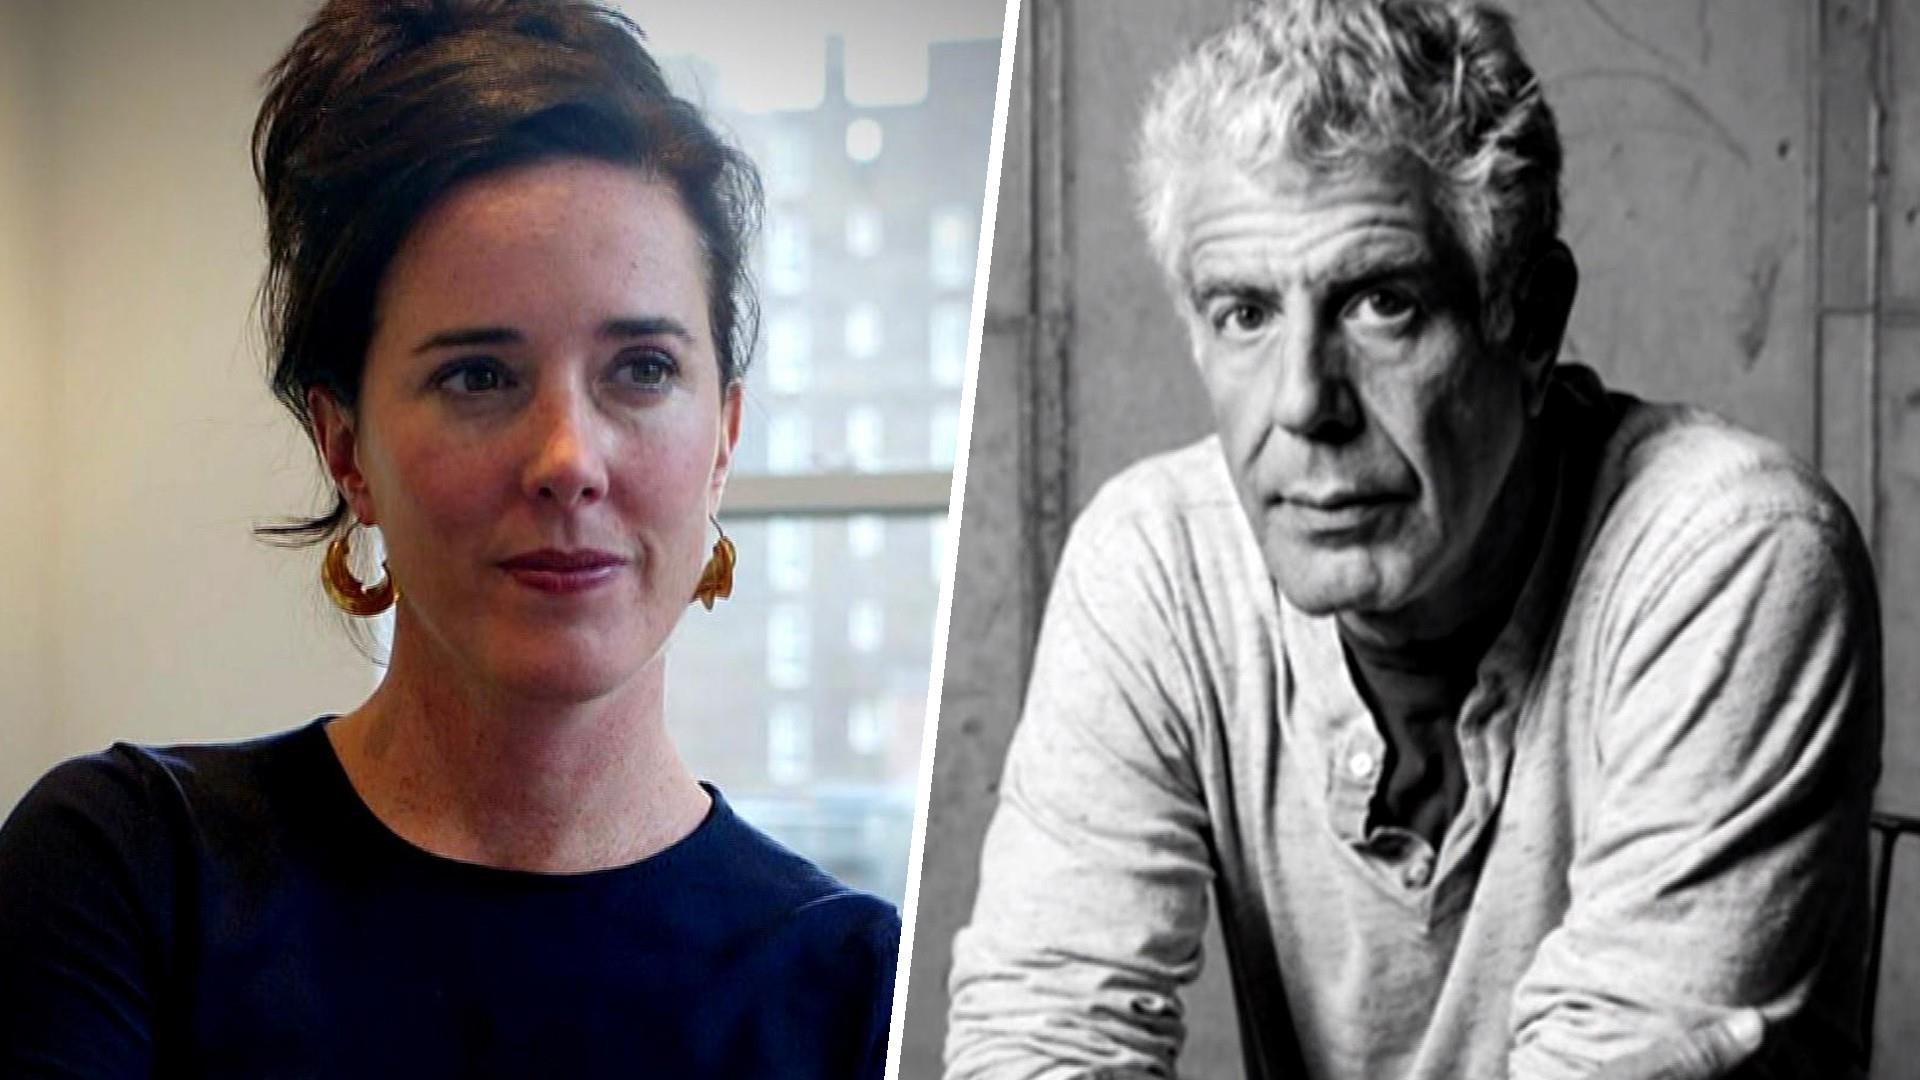 Anthony Bourdain and Kate Spade have celebs sharing about mental illness